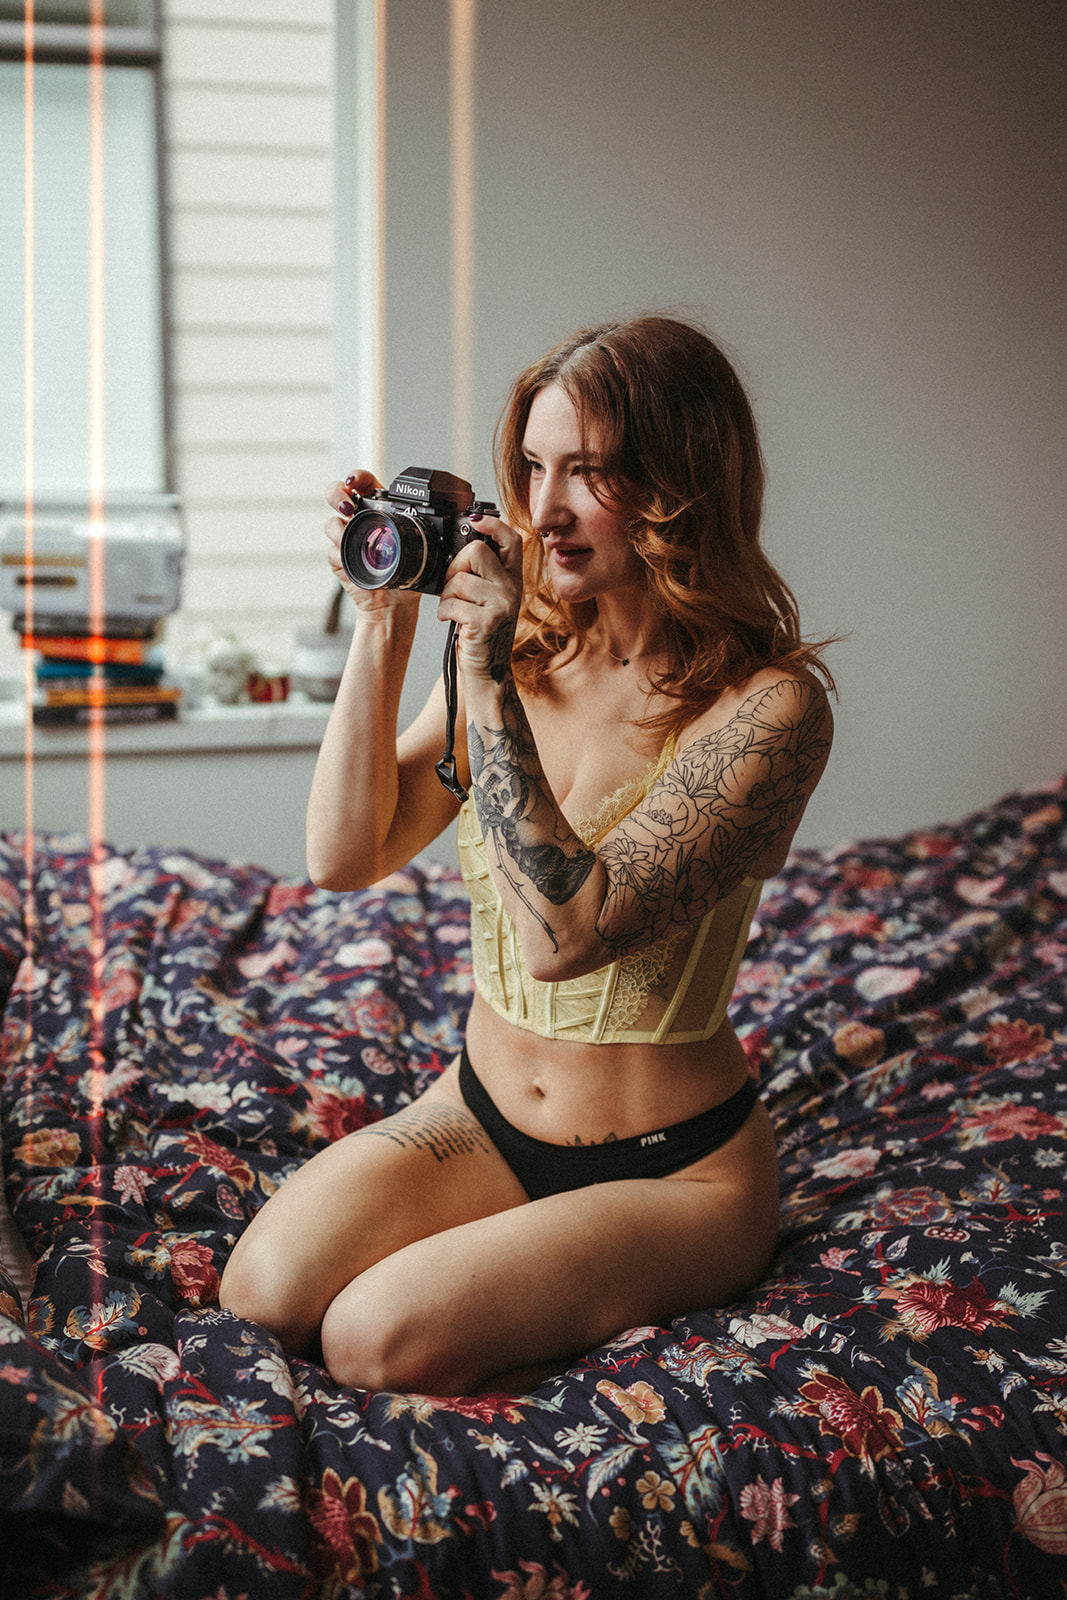 Red haired girl kneels on her bed holding a vintage slr camera